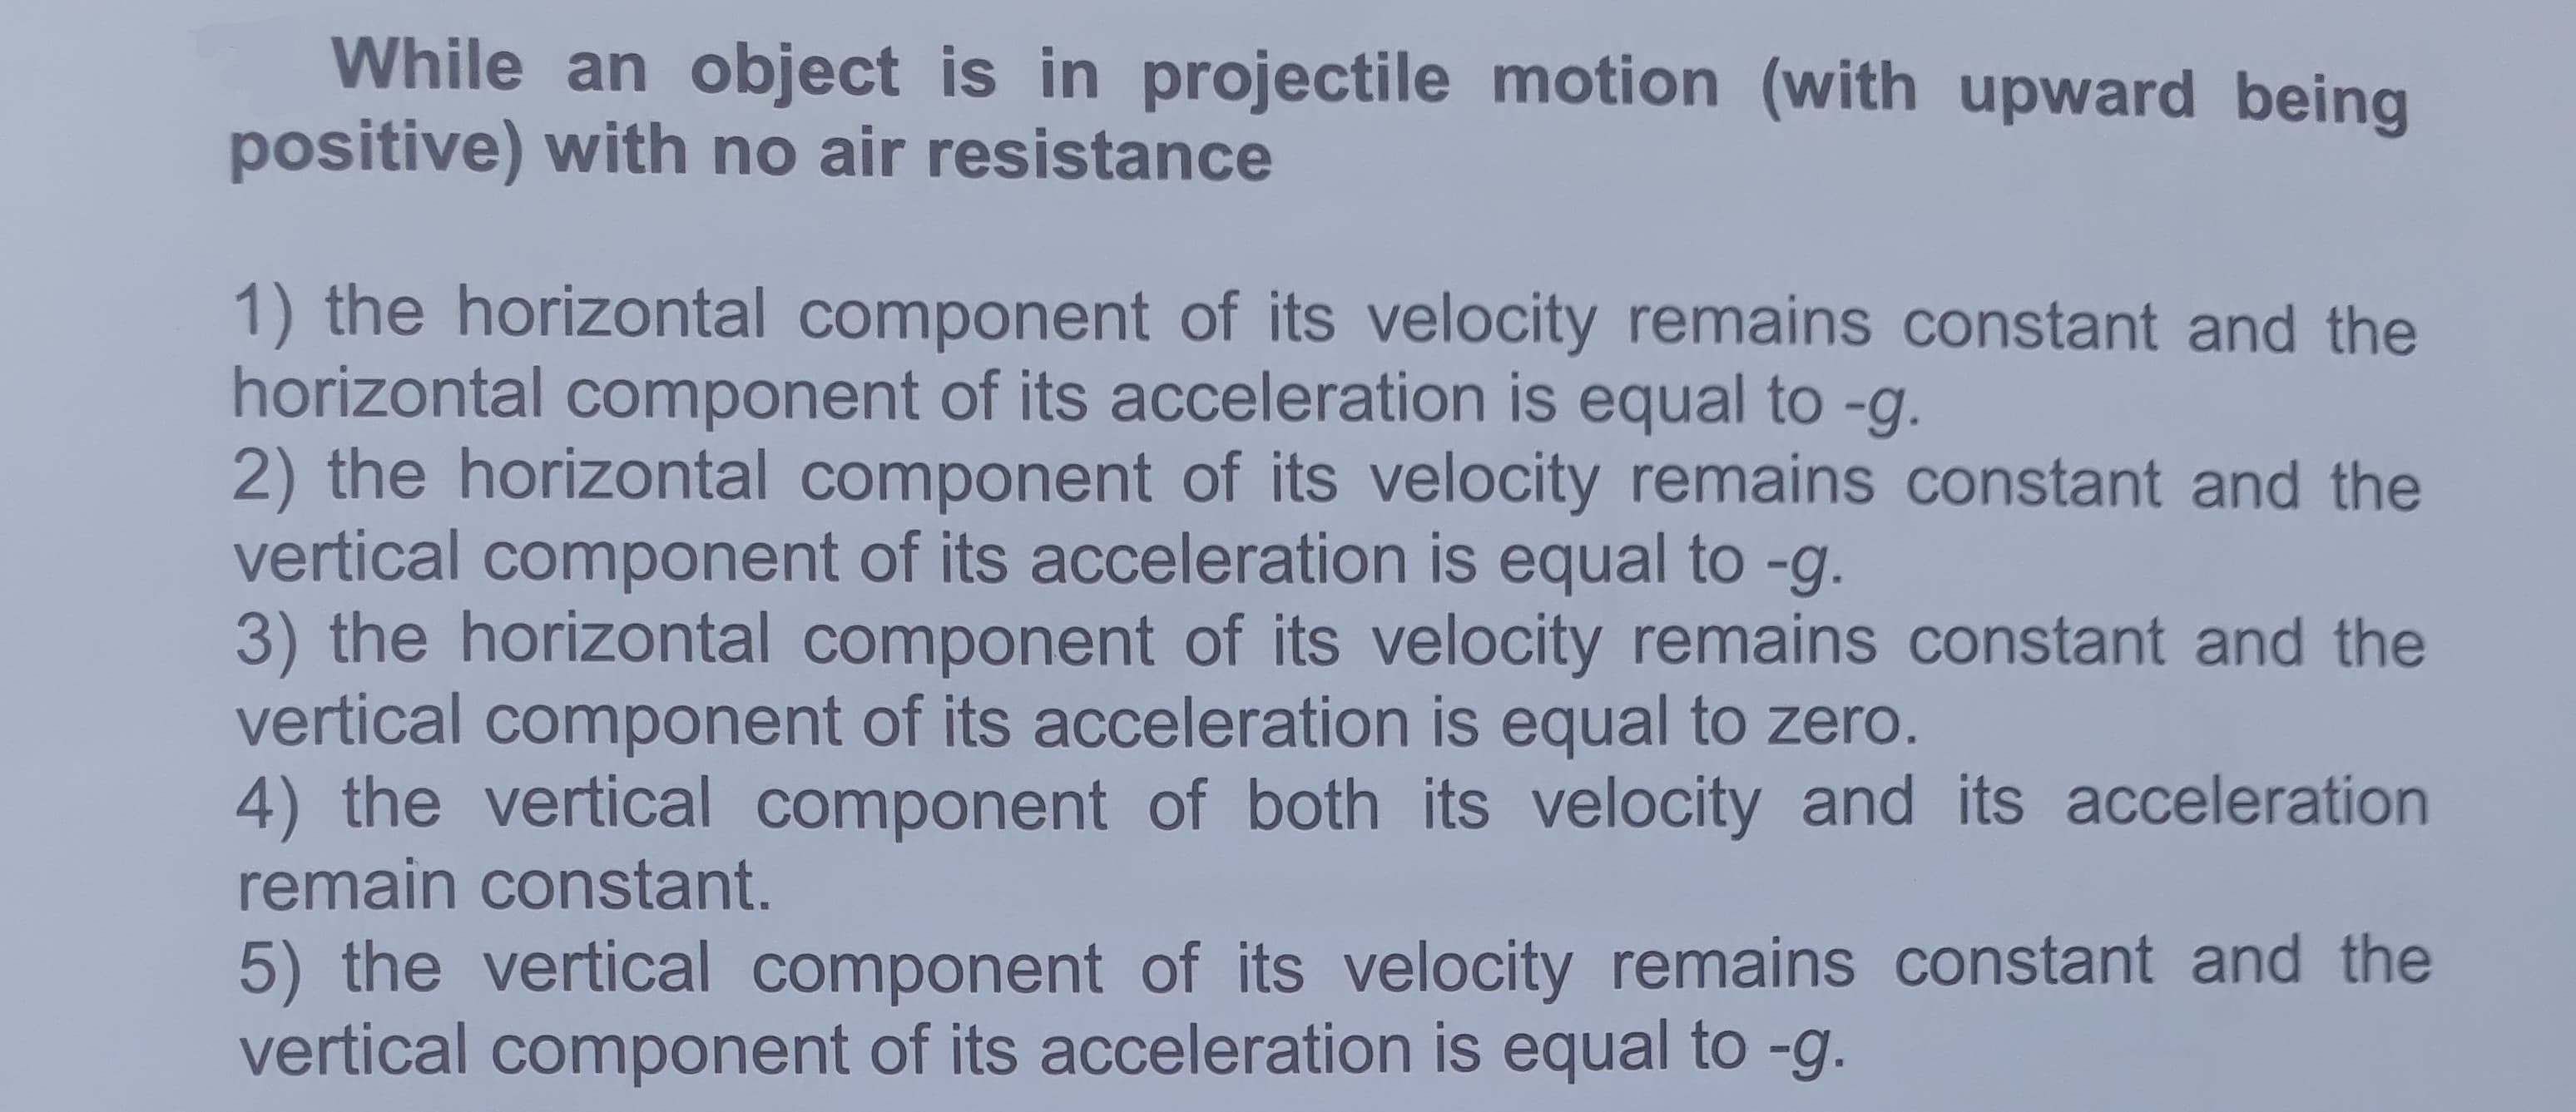 While an object is in projectile motion (with upward being
positive) with no air resistance
1) the horizontal component of its velocity remains constant and the
horizontal component of its acceleration is equal to -g.
2) the horizontal component of its velocity remains constant and the
vertical component of its acceleration is equal to -g.
3) the horizontal component of its velocity remains constant and the
vertical component of its acceleration is equal to zero.
4) the vertical component of both its velocity and its acceleration
remain constant.
5) the vertical component of its velocity remains constant and the
vertical component of its acceleration is equal to -g.
